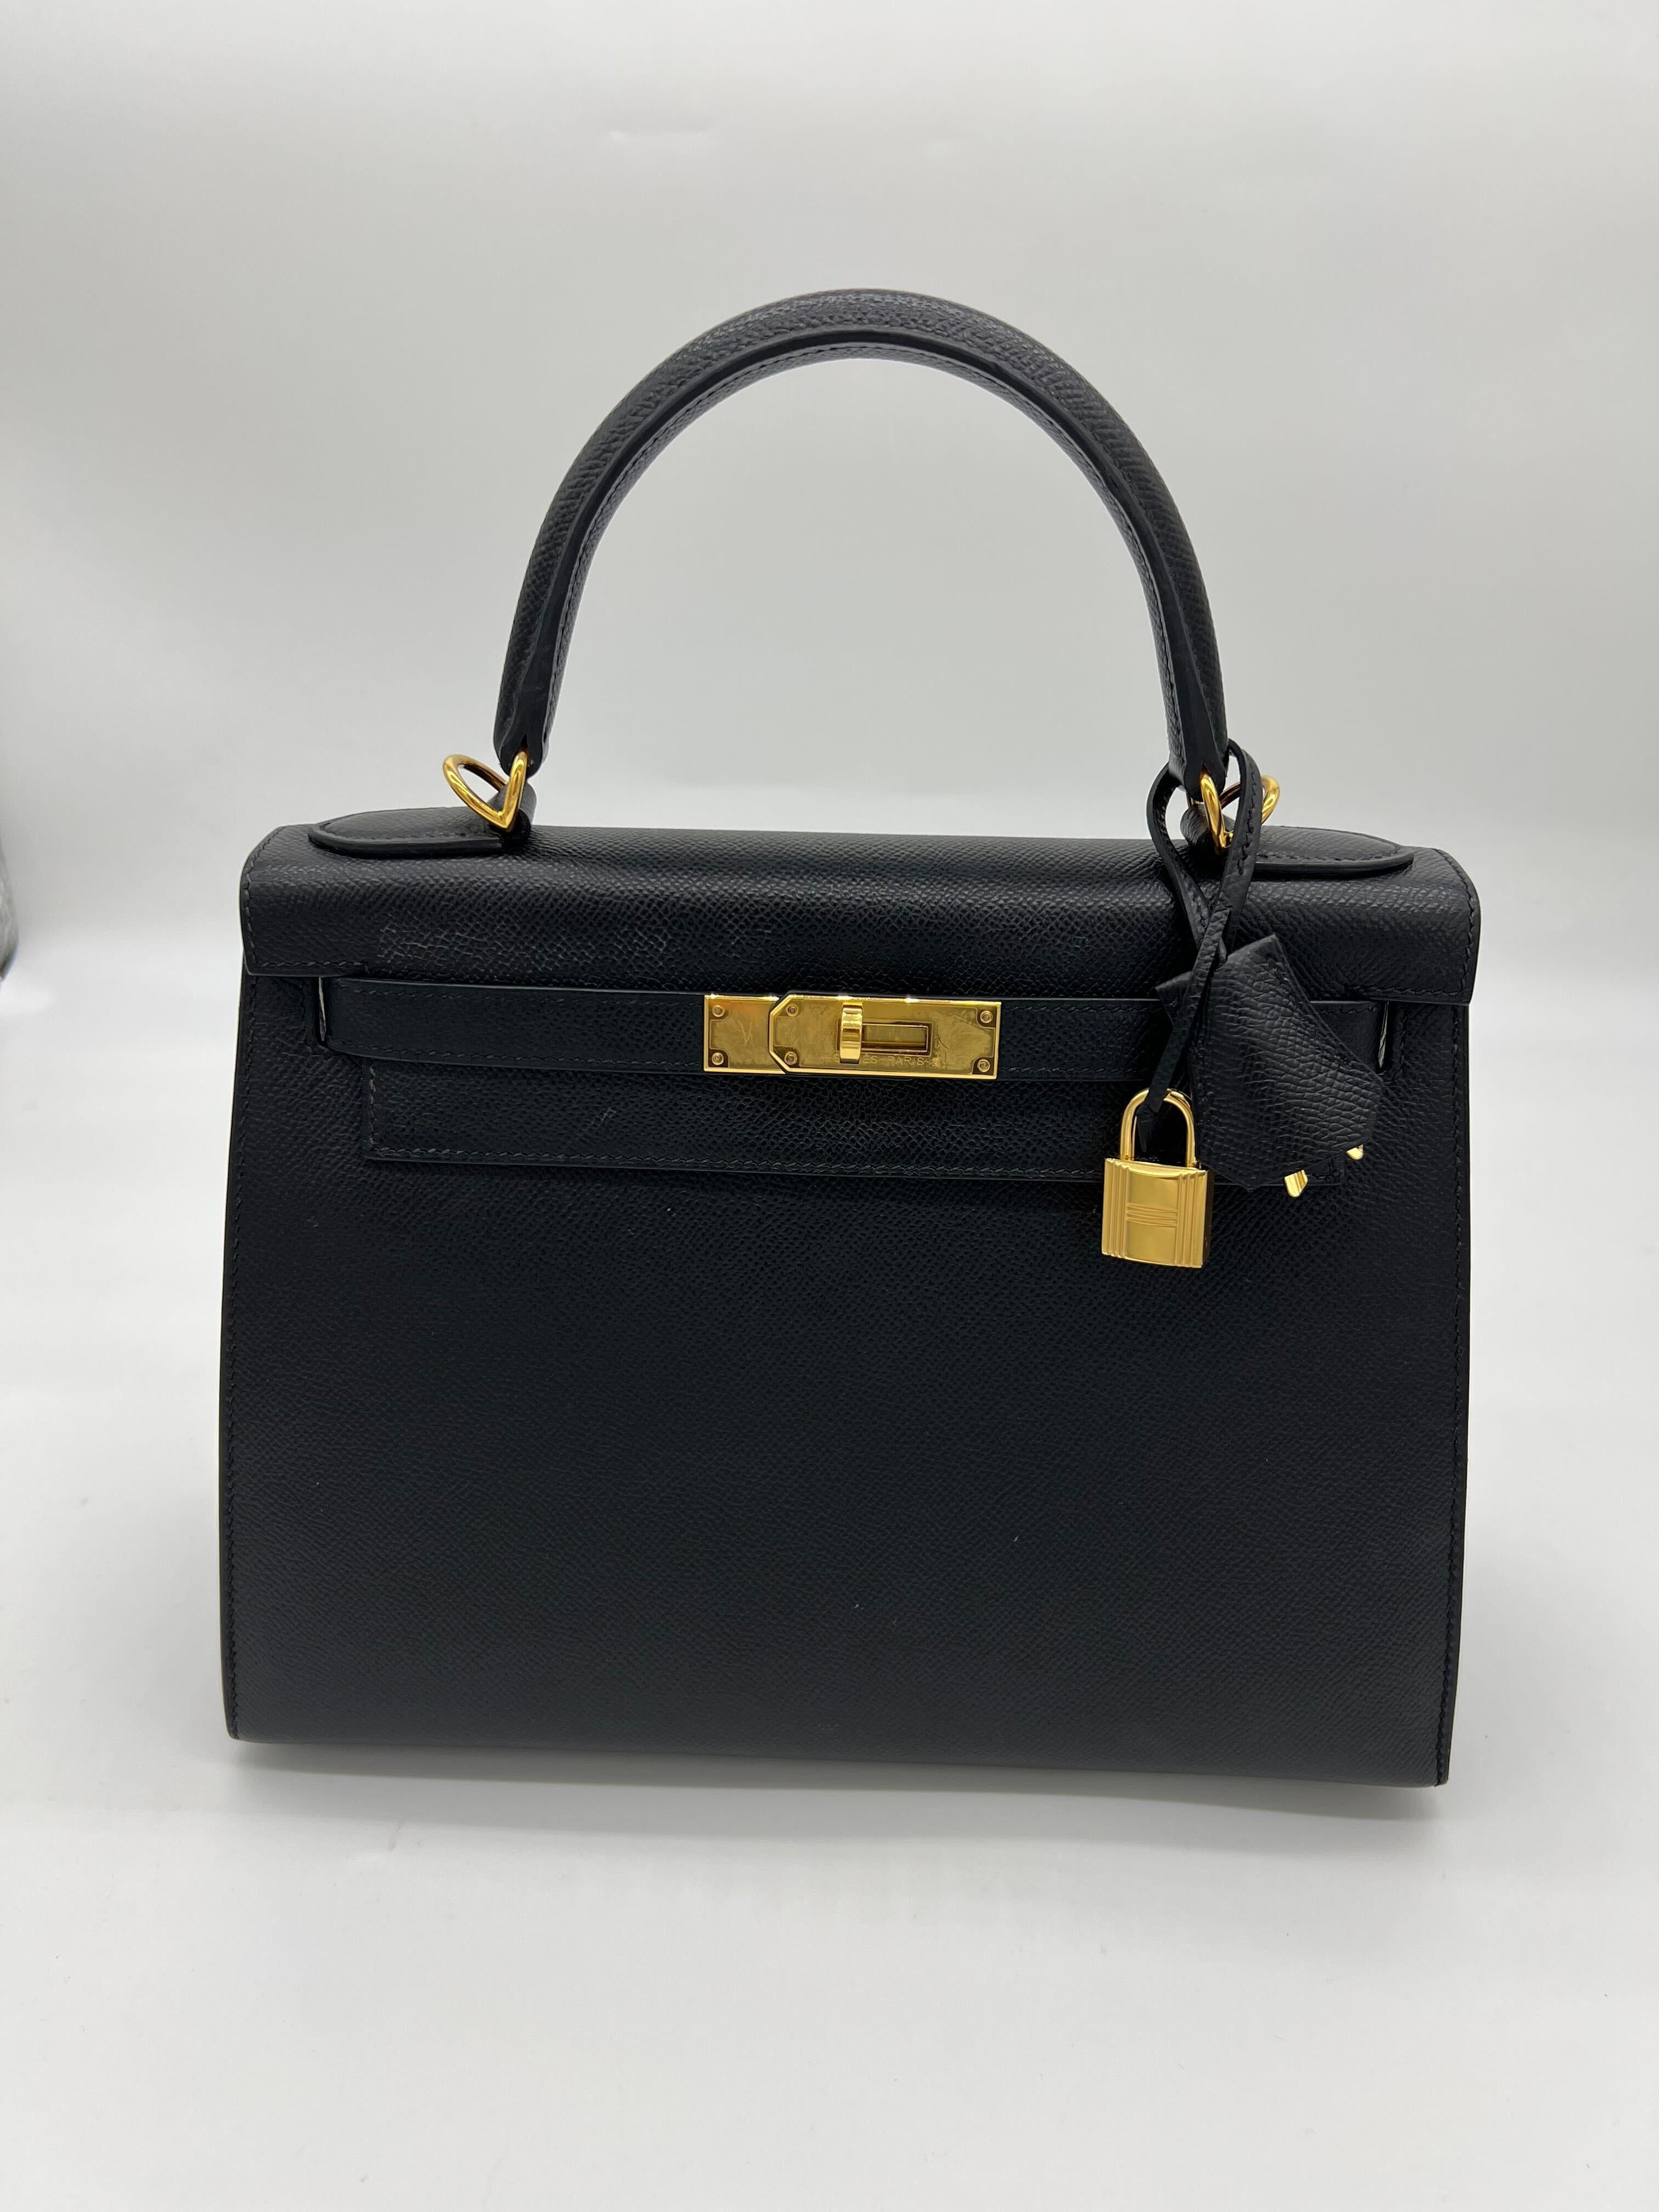 Hermes Kelly 28 Sellier Noir Epsom Leather Gold Hardware

Condition & Year: Pre-owned 2020 
Measurements: (H) 22cm (W) 28cm (D) 11 cm
Material: Epsom Leather
Hardware: Gold
 
*Comes in original packaging. Missing receipt and raincoat.